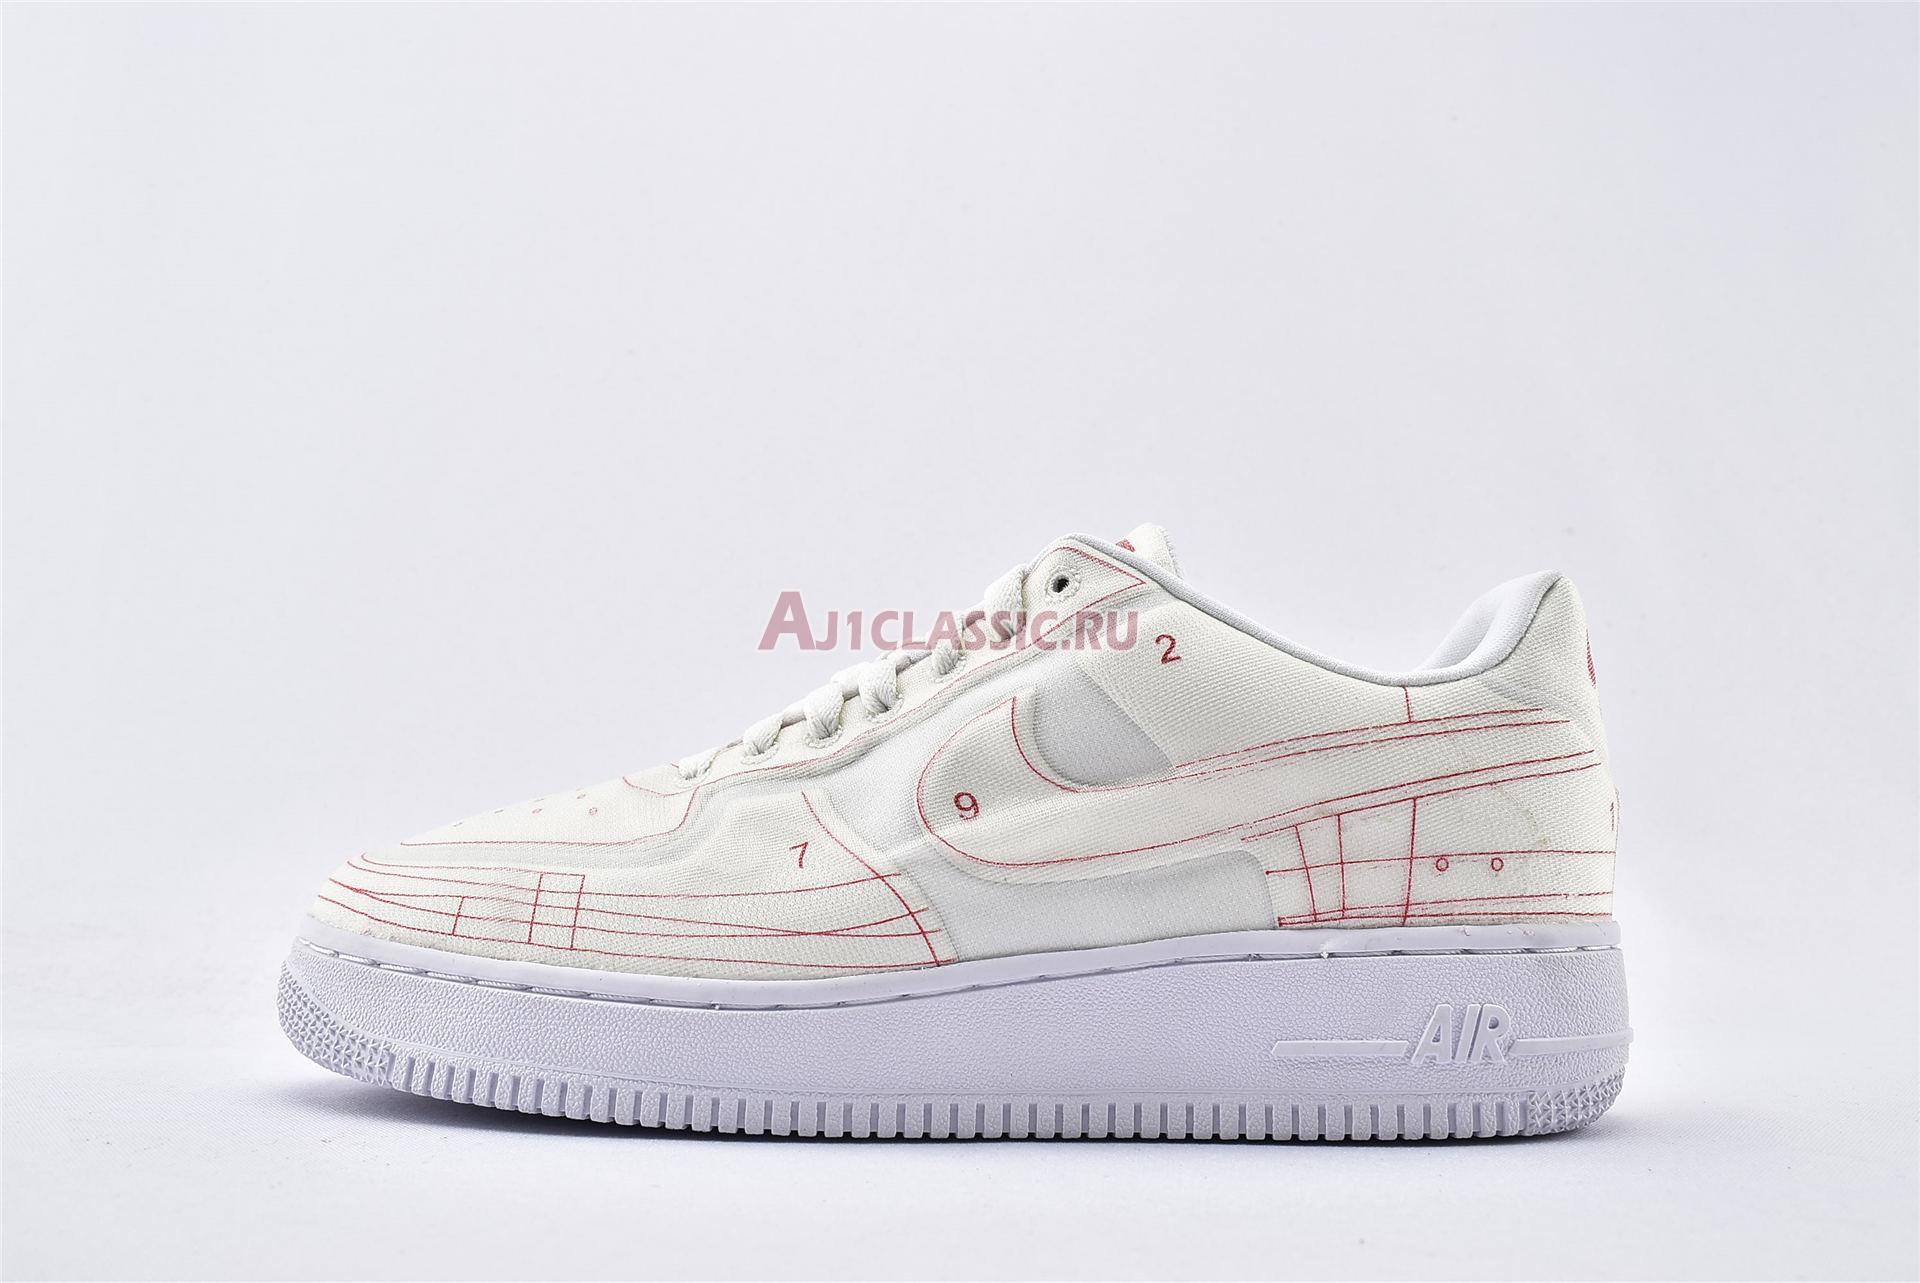 Nike Wmns Air Force 1 07 Low LX "Summit White" CI3445-100